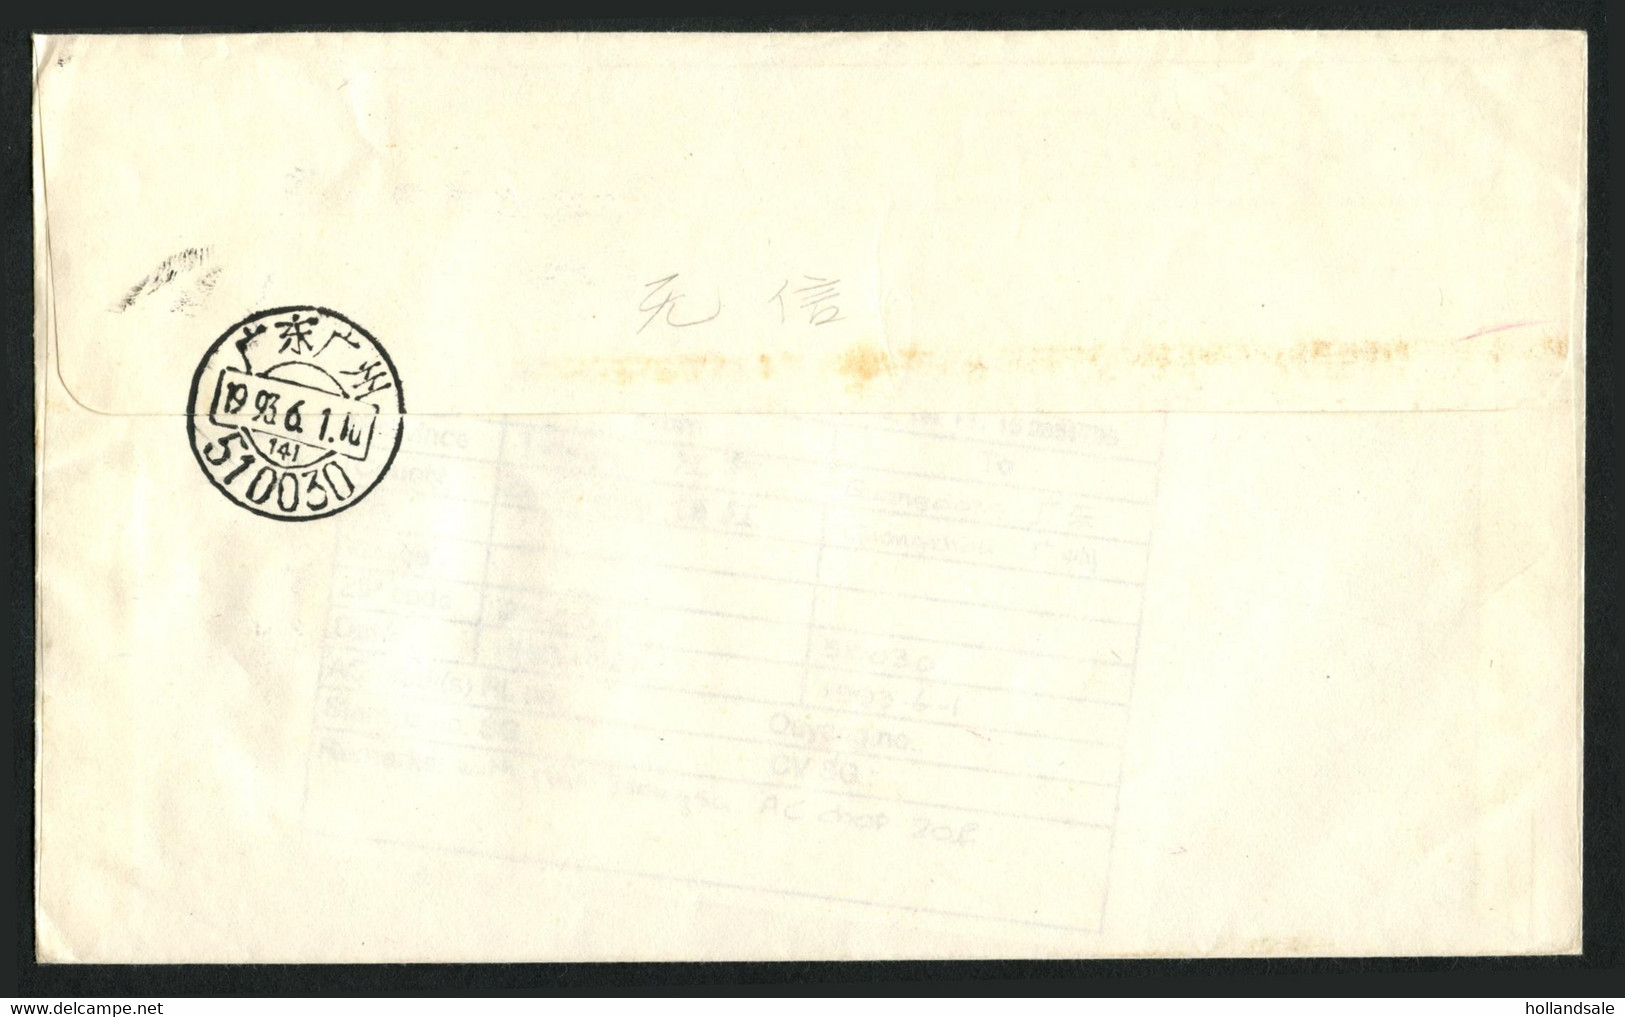 CHINA PRC ADDED CHARGE LABELS - 1993, May 27. R-cover From Zhenjiang To Shanghai. Red Frmes 20f AC-chop. - Postage Due